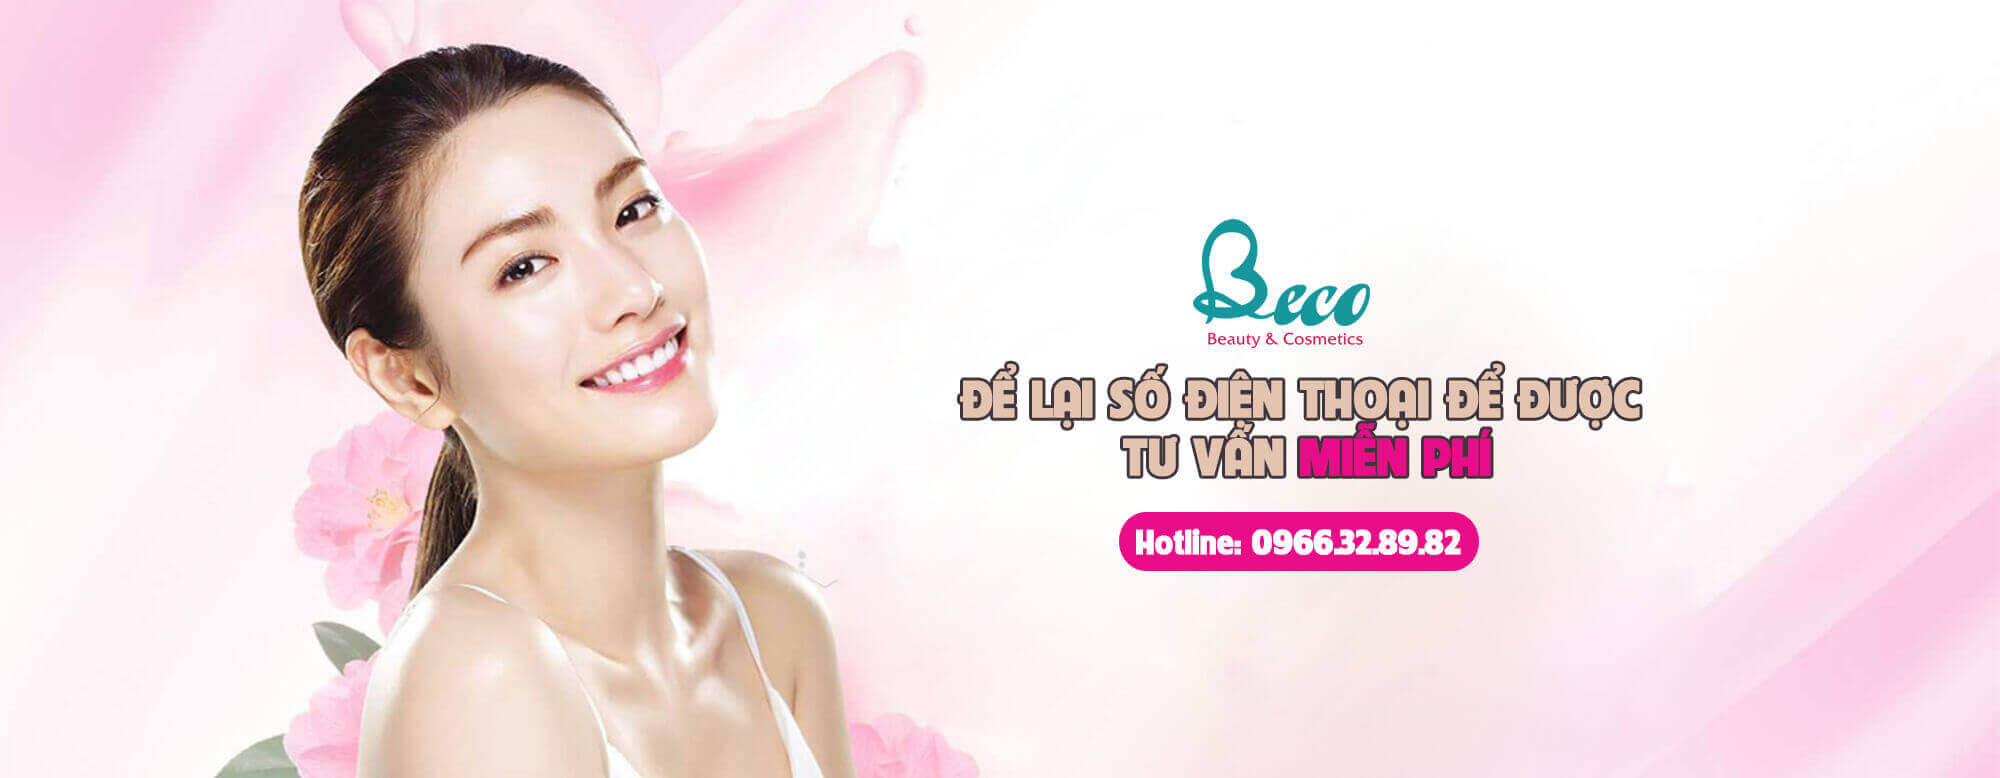 beco.vn